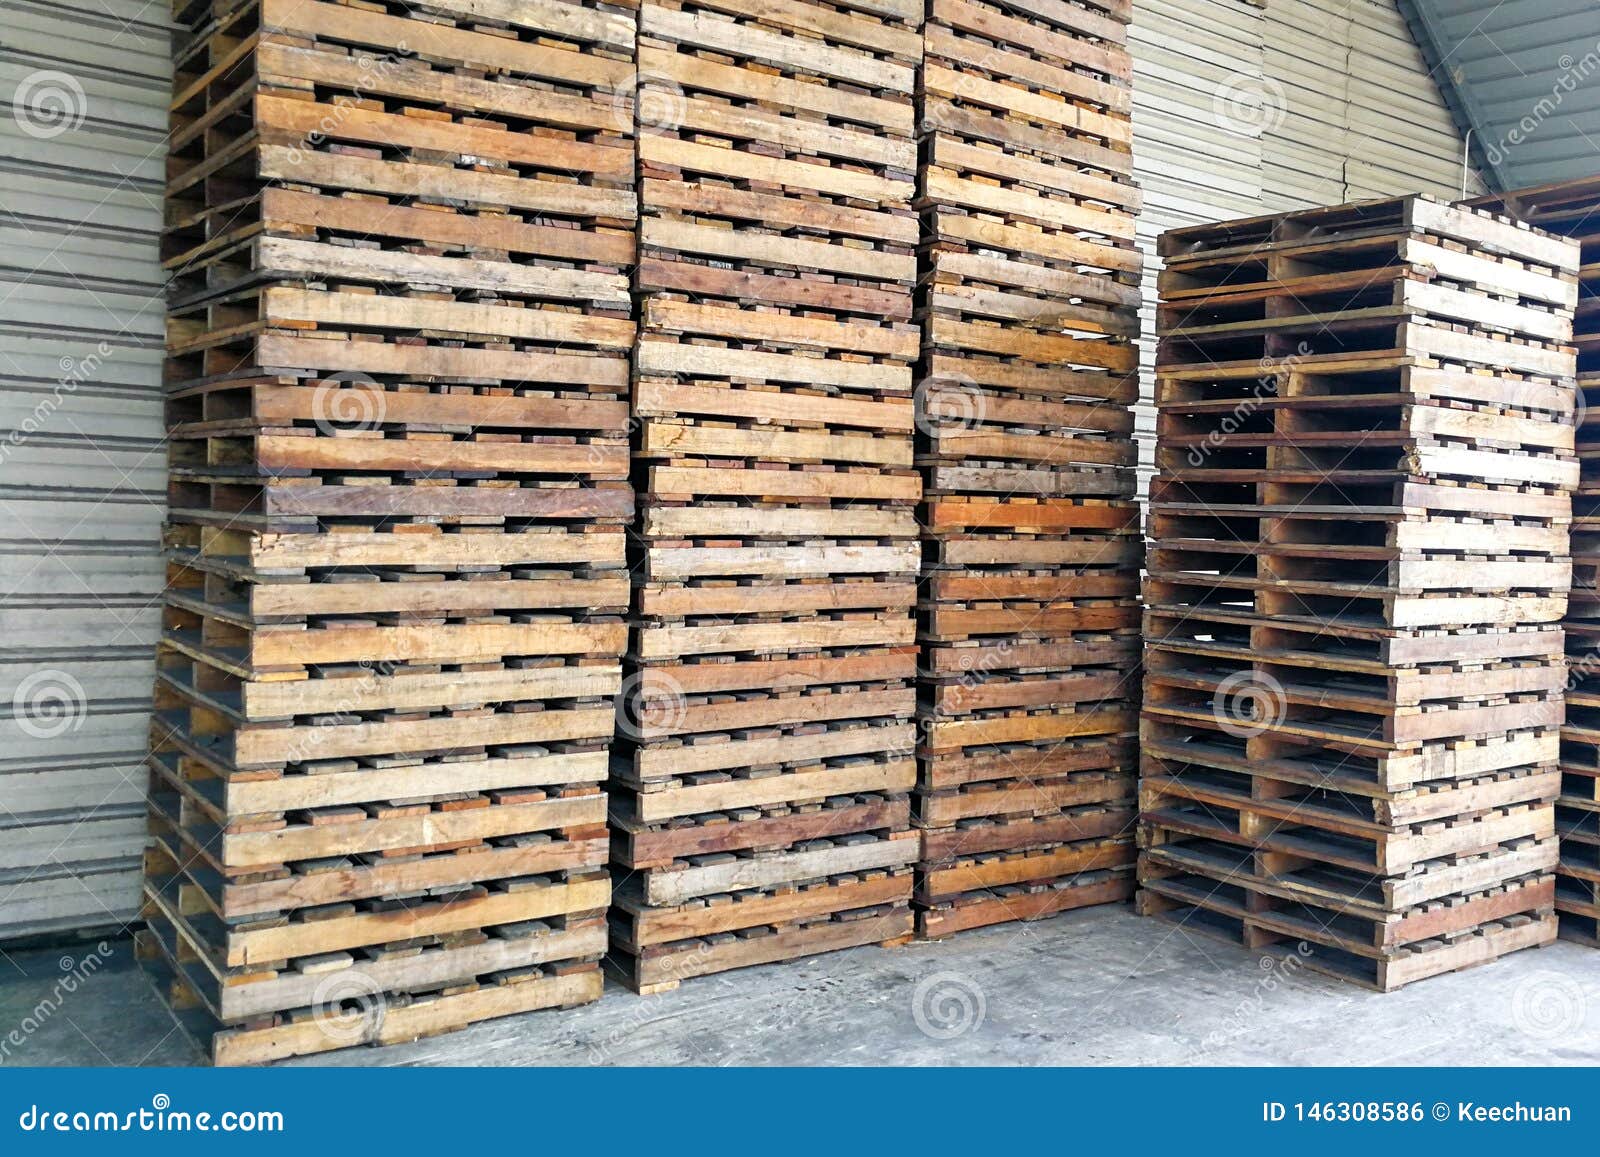 Stack Of Wooden Pallets At Warehouse. Transportation ...